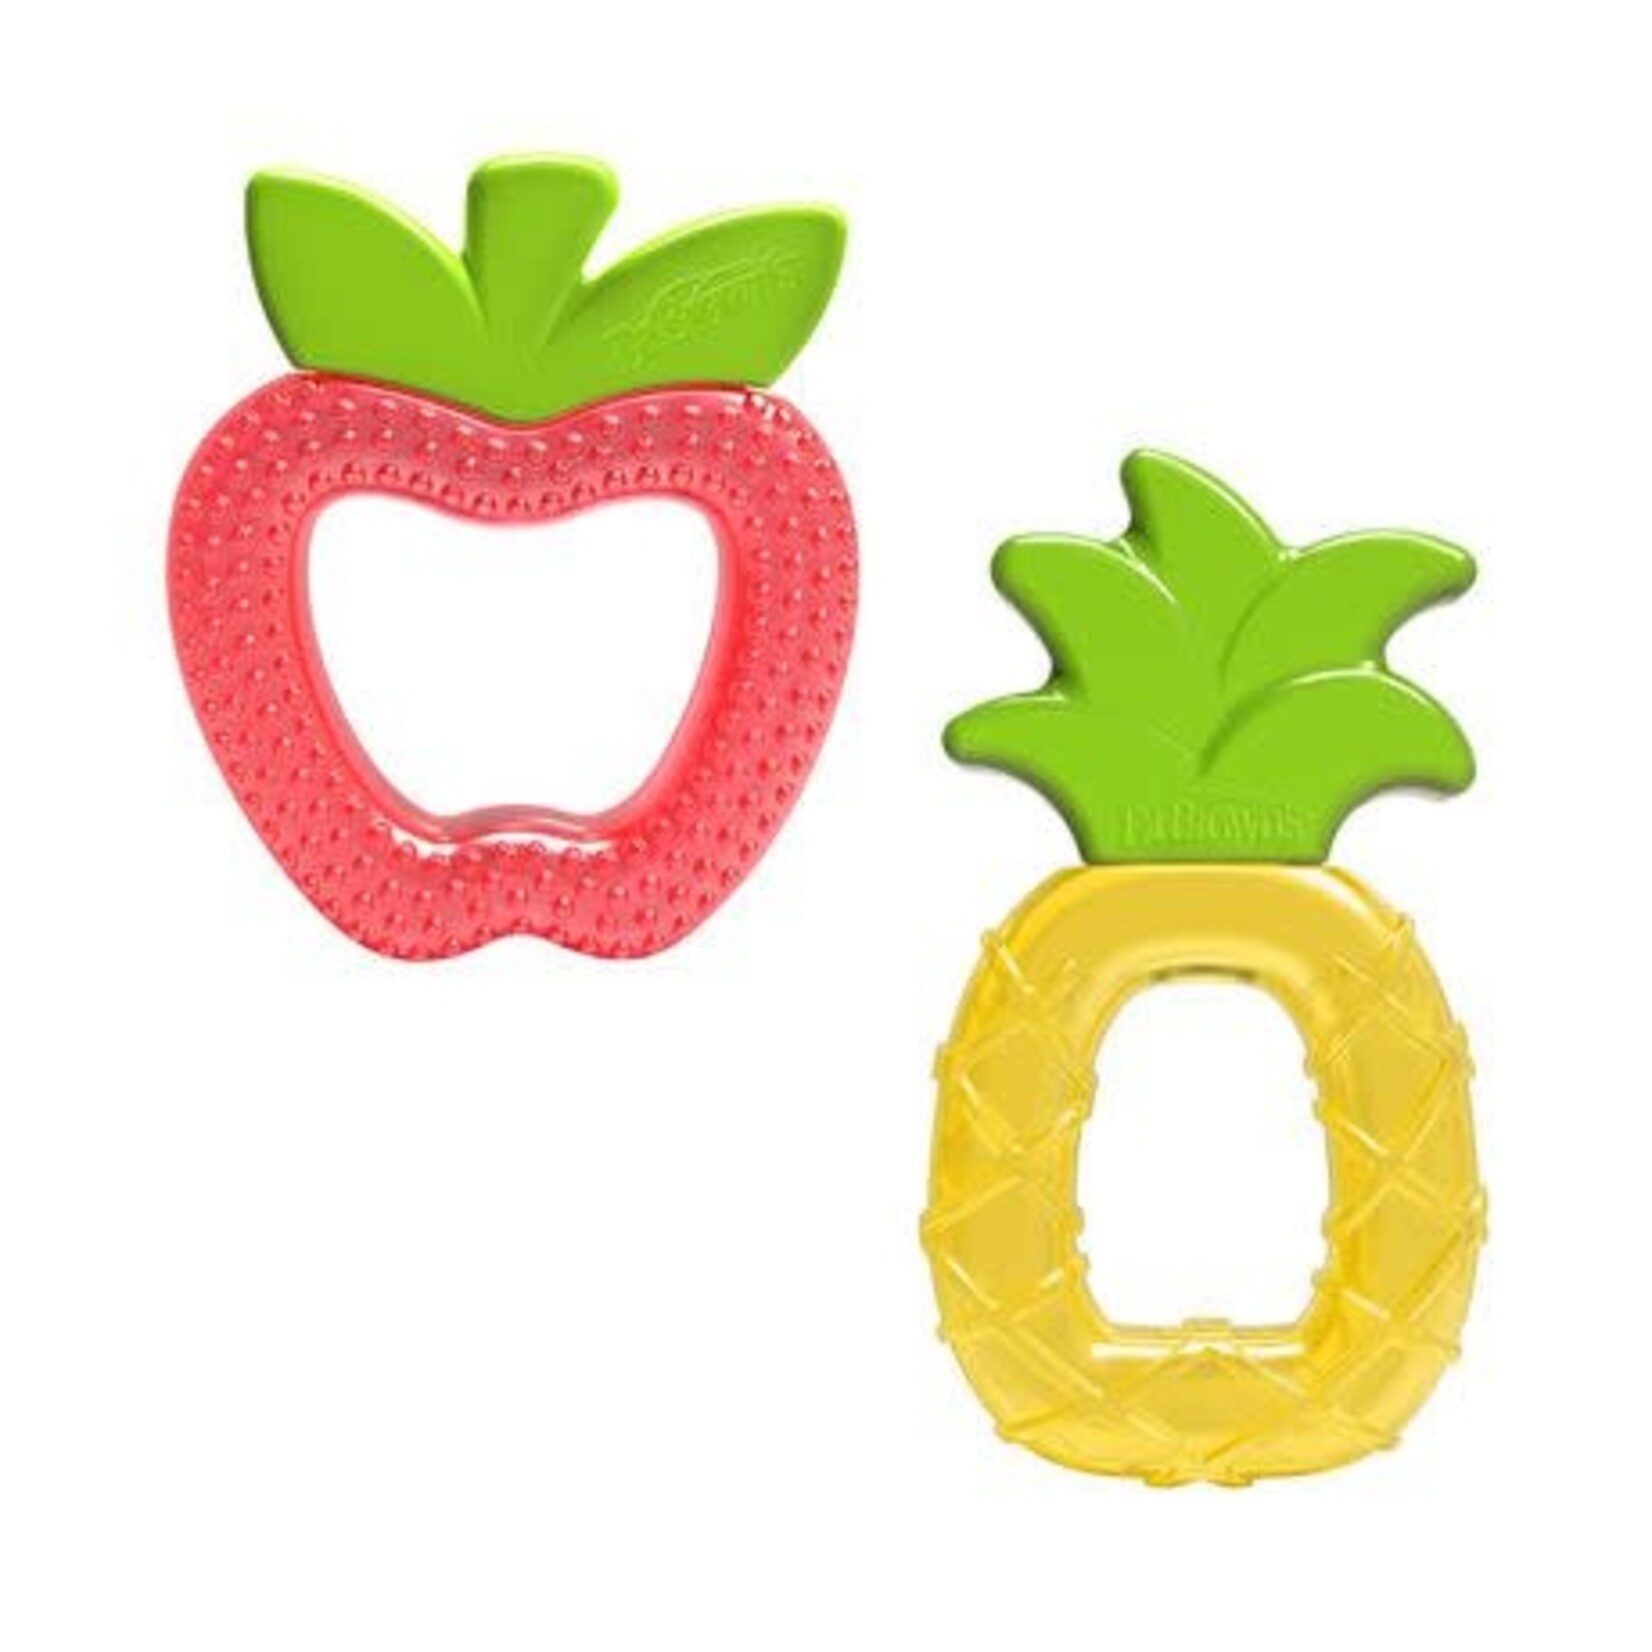 Dr Browns DR BROWNS AQUACOOL WATER-FILLED TEETHERS 2PK APPLE/PINEAPPLE